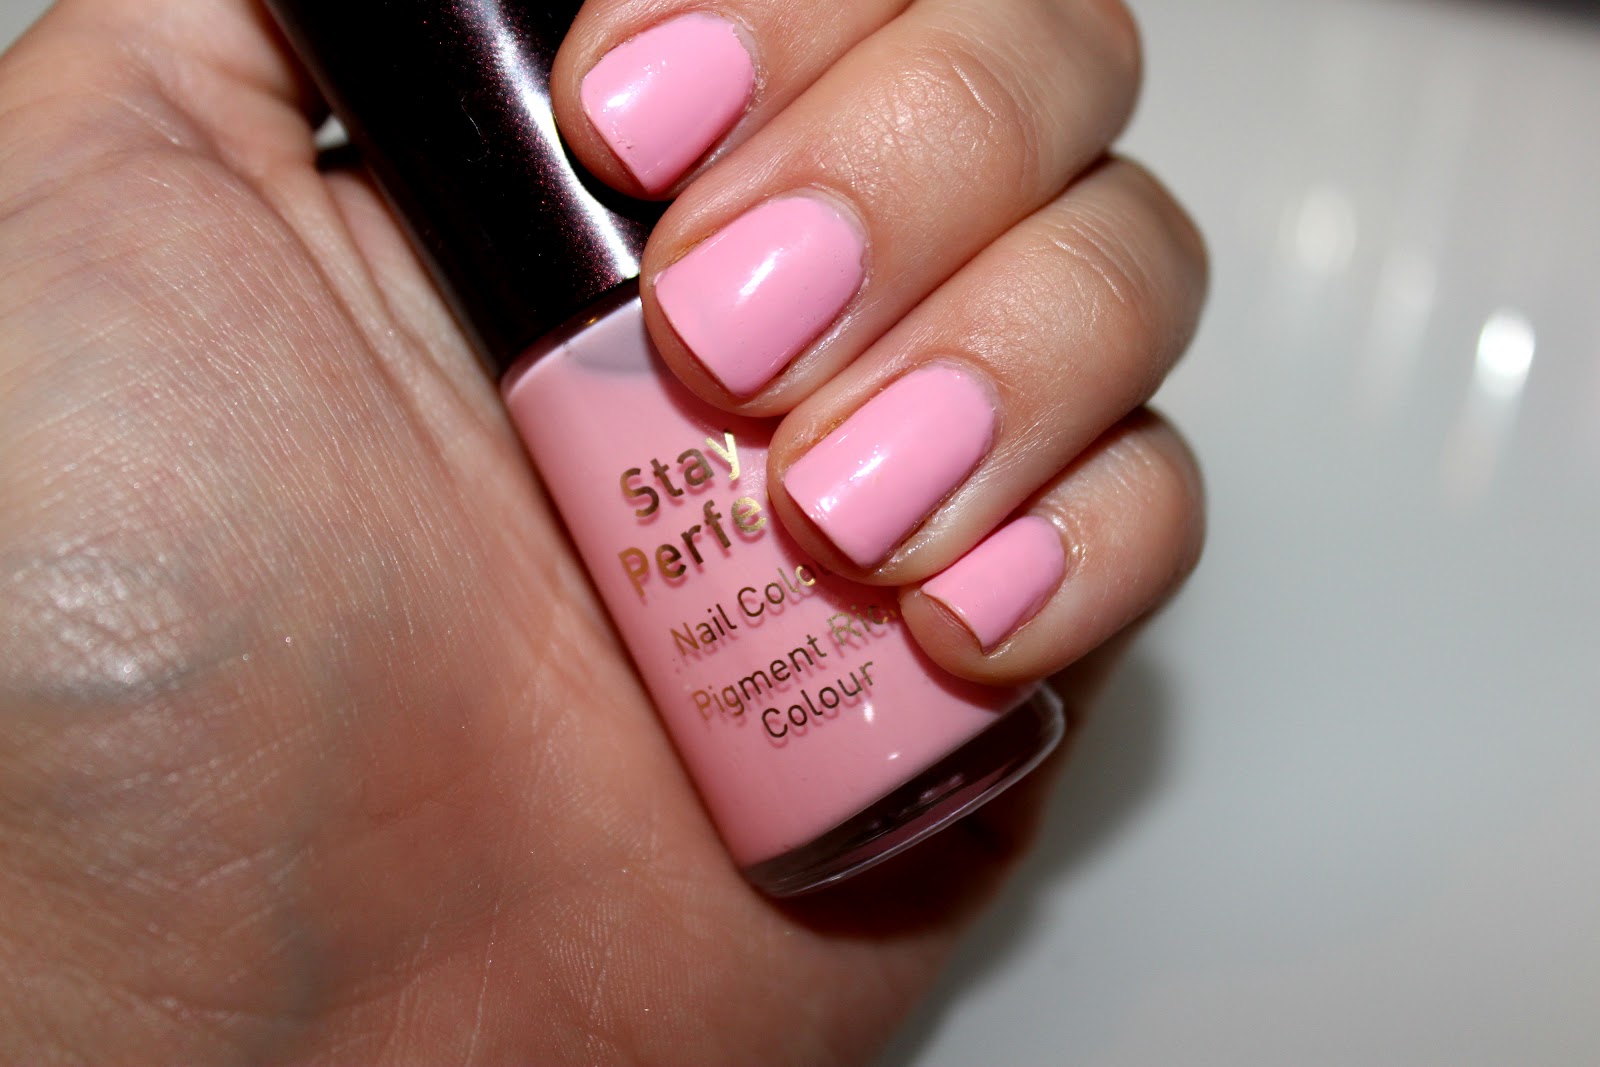 7. Nail polish for chubby fingers - wide 9